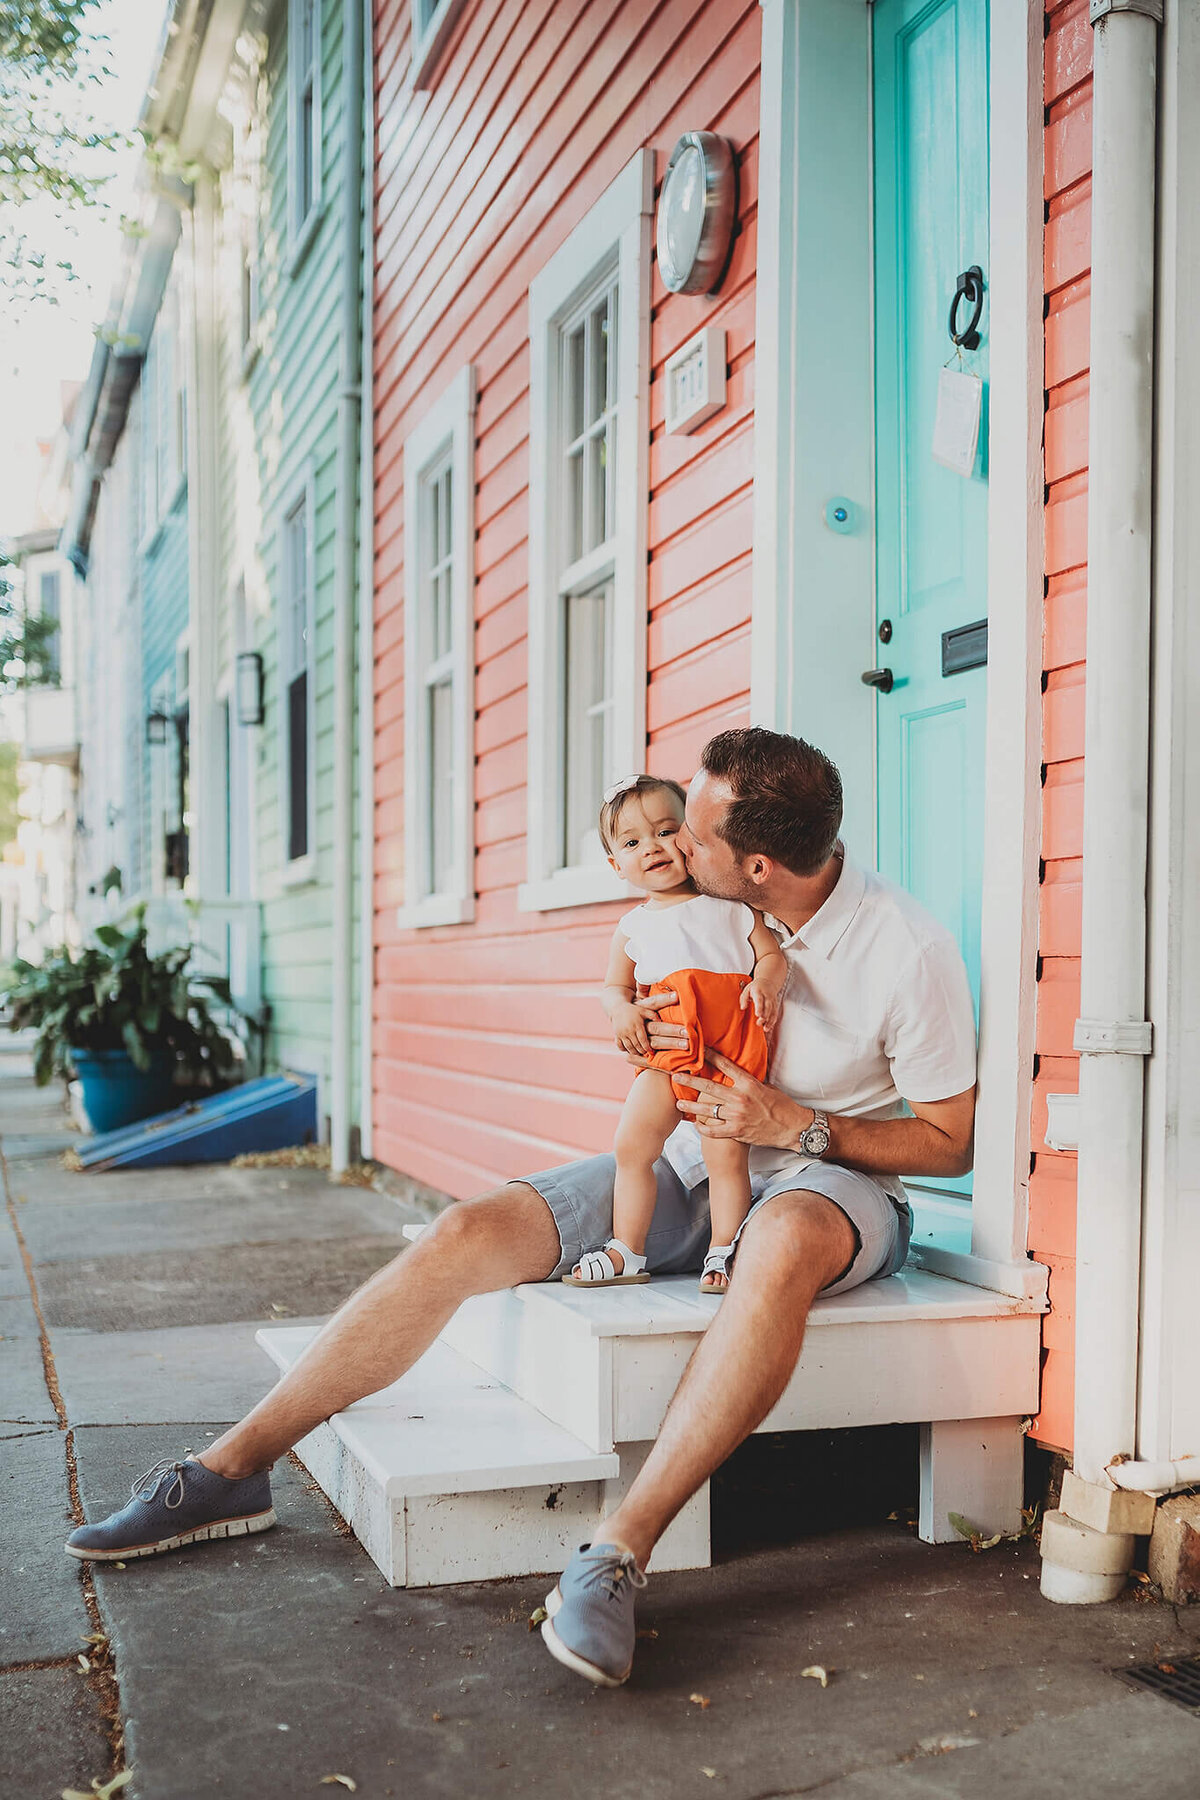 Father kissing baby in orange shorts in front of colorful houses in Fells Point Baltimore Maryland